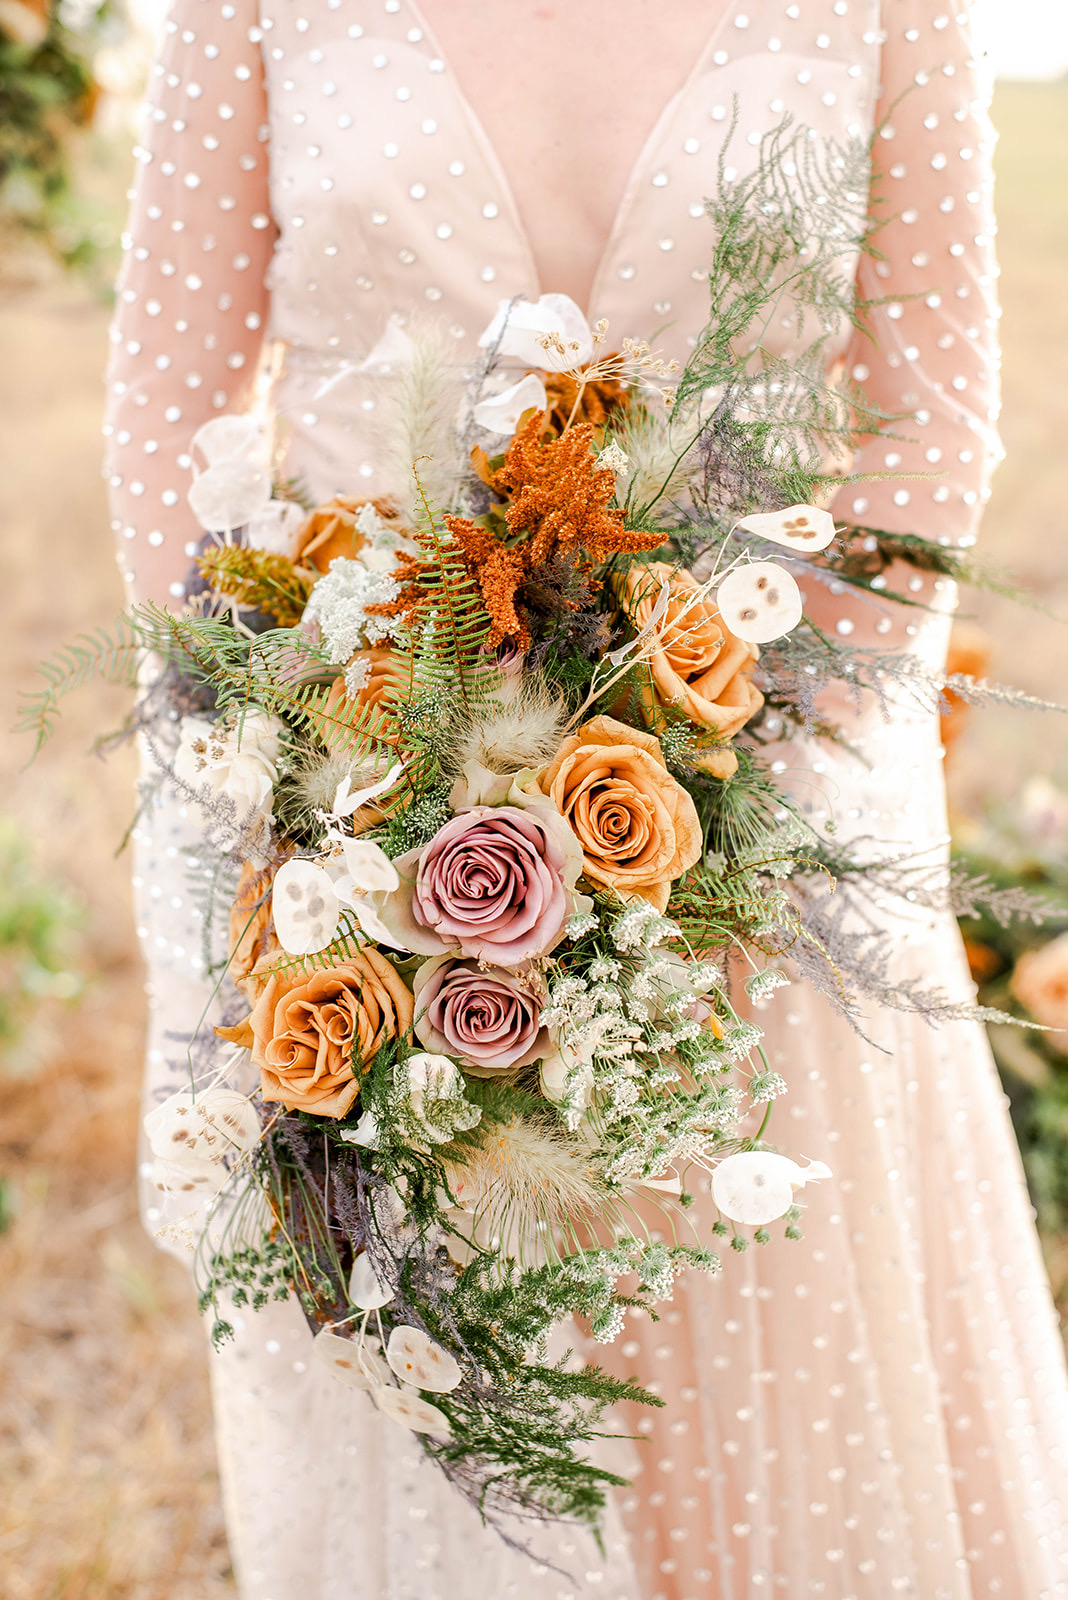 Styled Shoot at The Allen Farmhaus